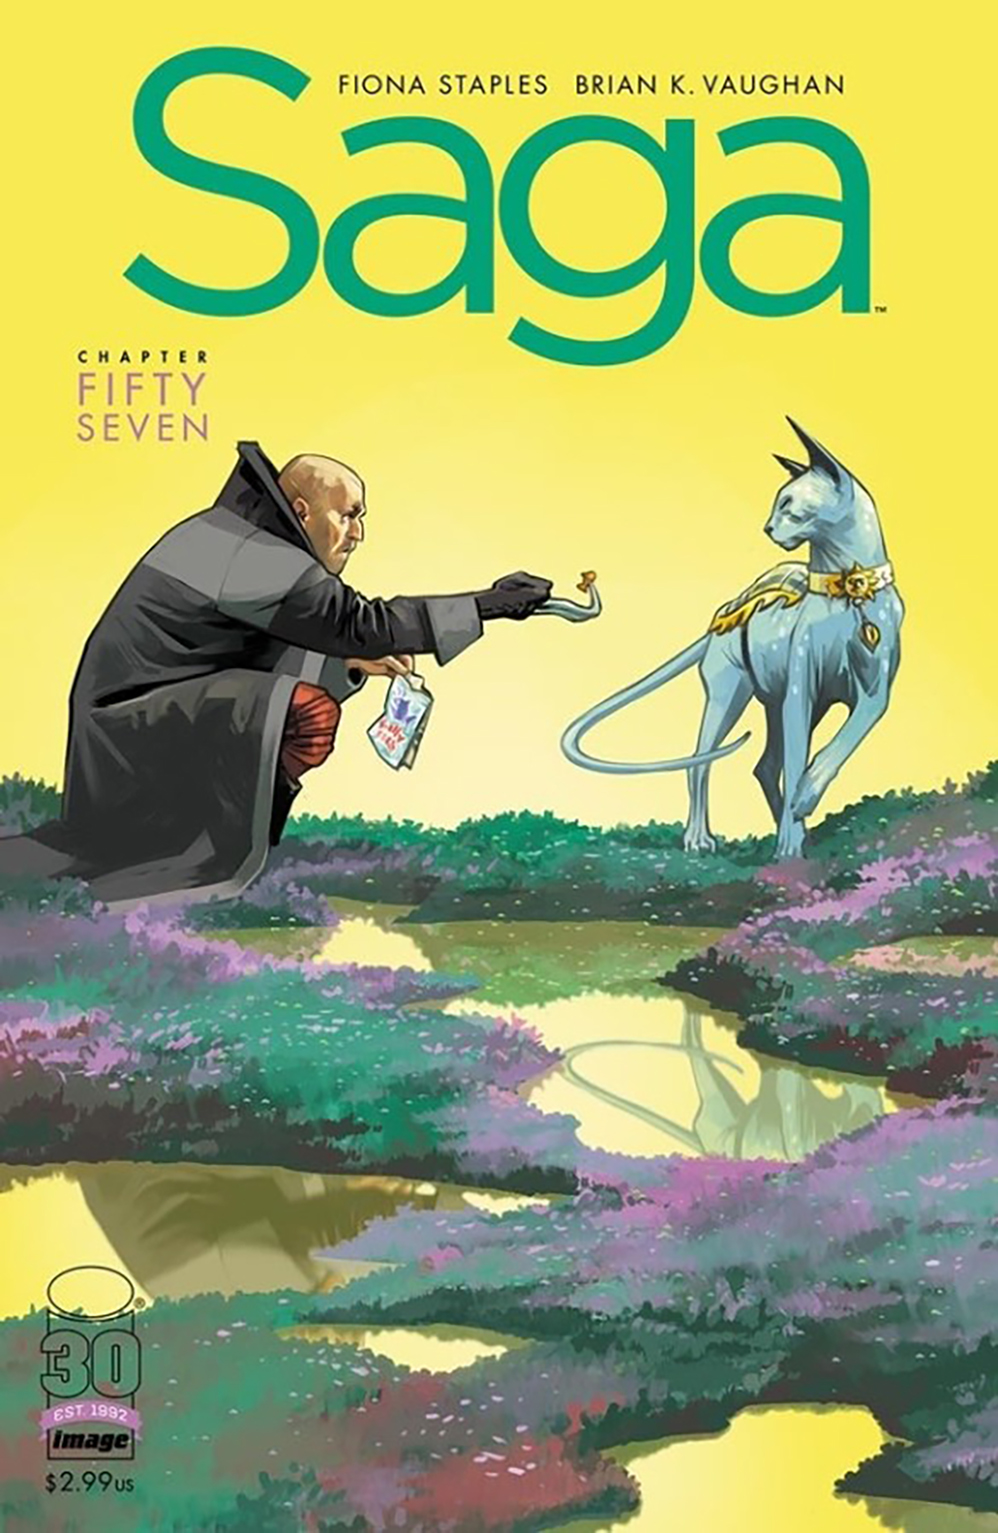 The front cover art of issue 57 of the comic Saga. The series is written by Brian K. Vaughan and illustrated by Fiona Staples. Please buy it from a local comic shop. Photo courtesy of Image Comics